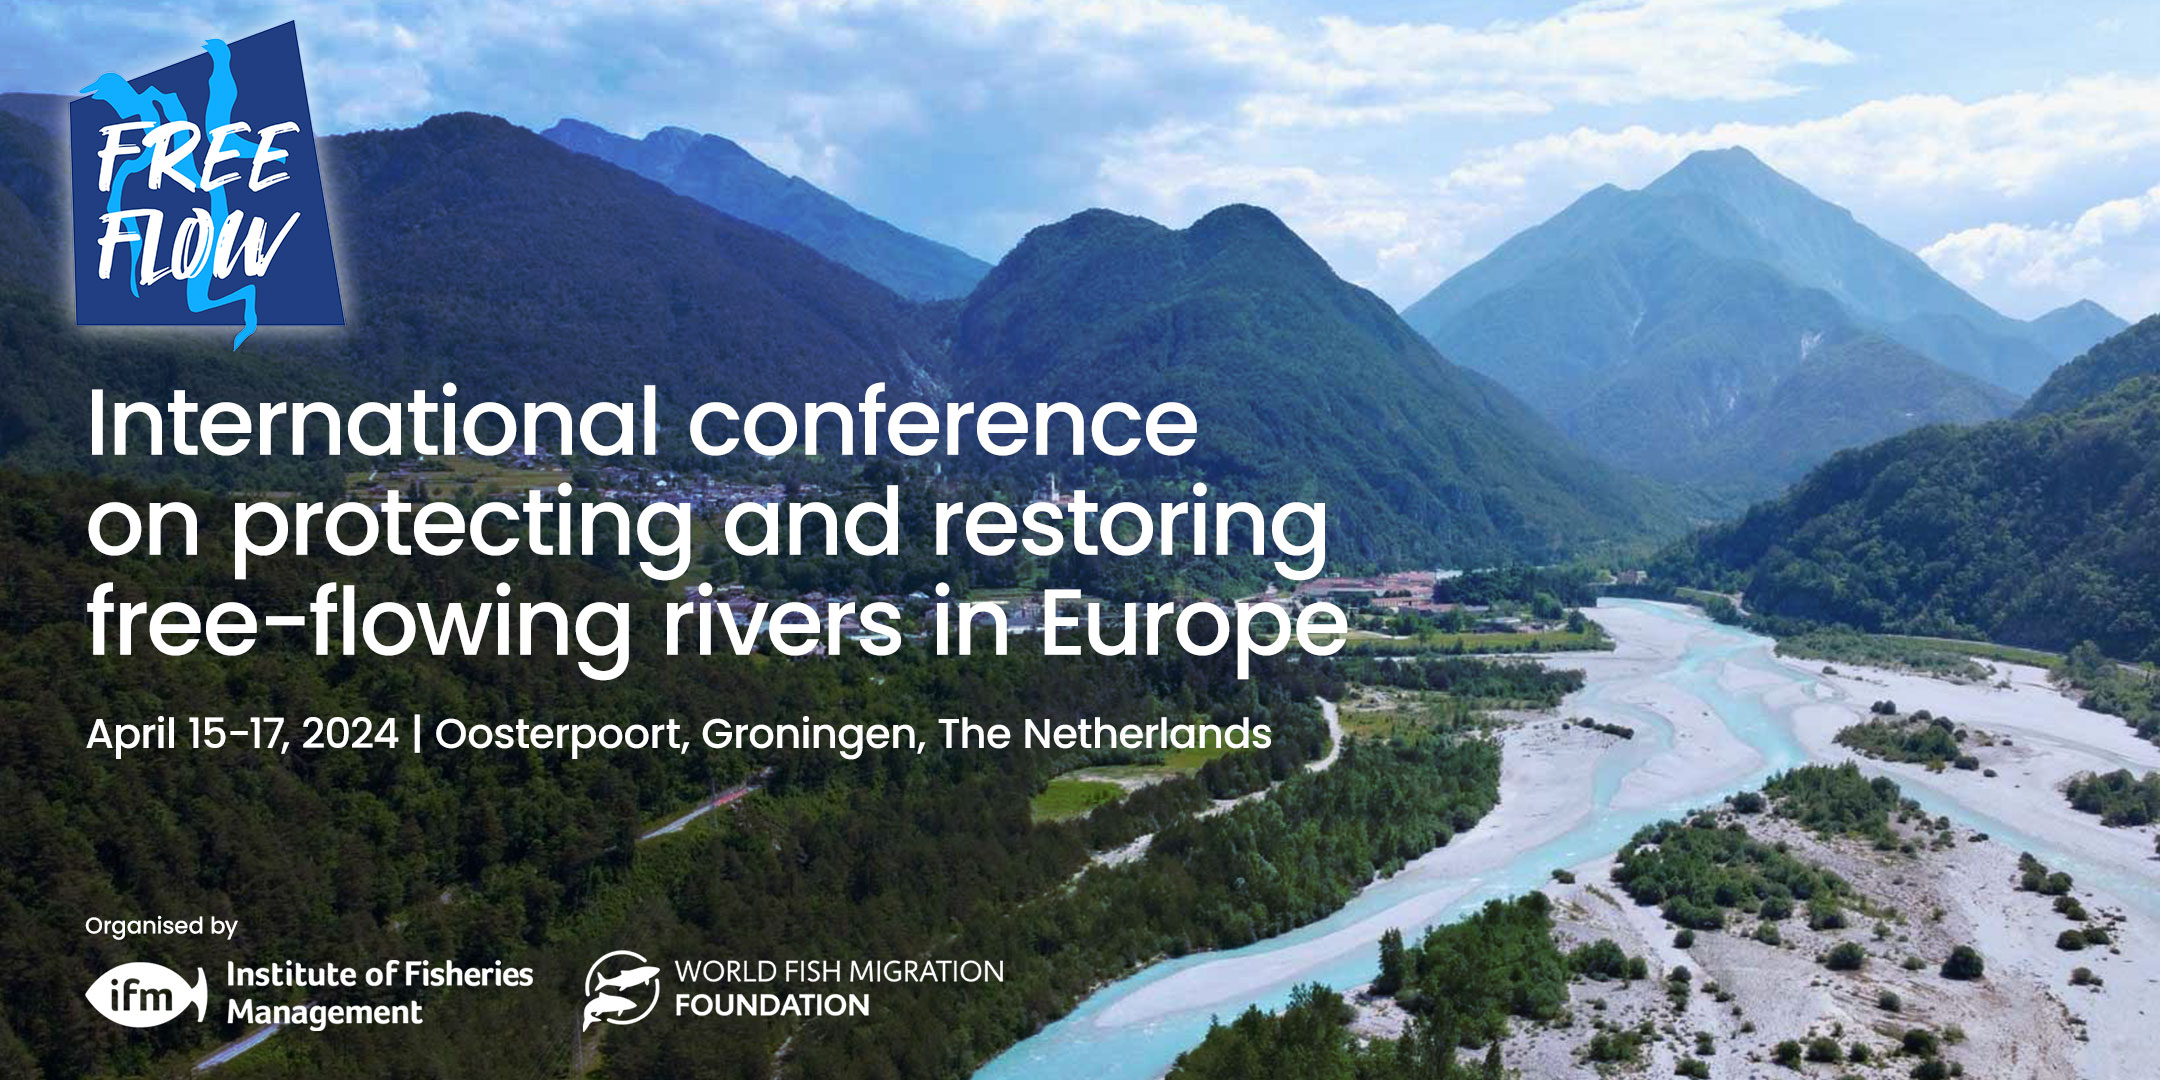 Free Flow 2024 – International conference on protecting and restoring free-flowing rivers in Europe